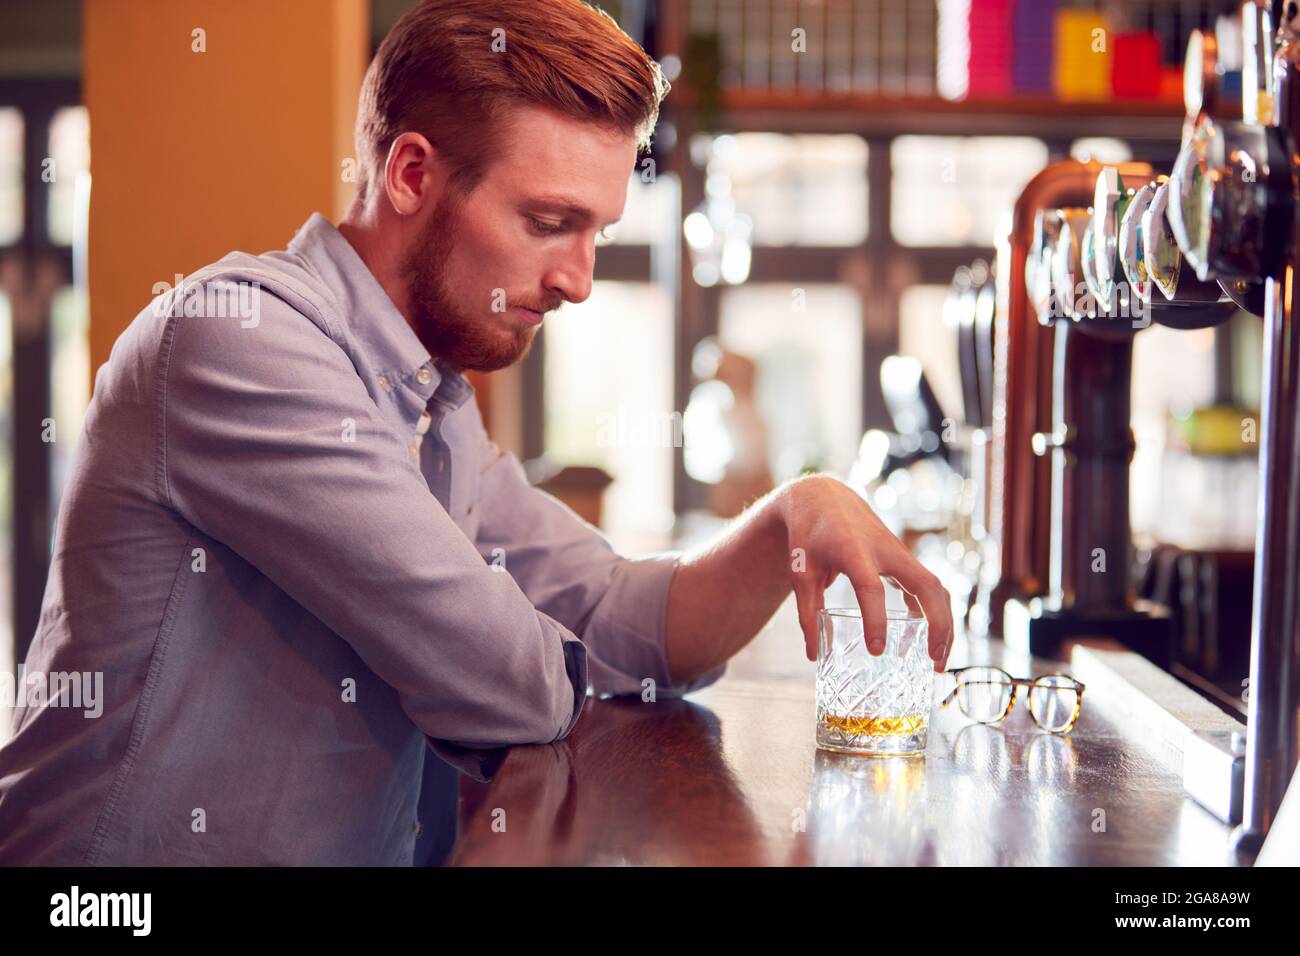 Unhappy Man Sitting At Pub Bar Drinking Alone With Glass Of Whisky Stock Photo